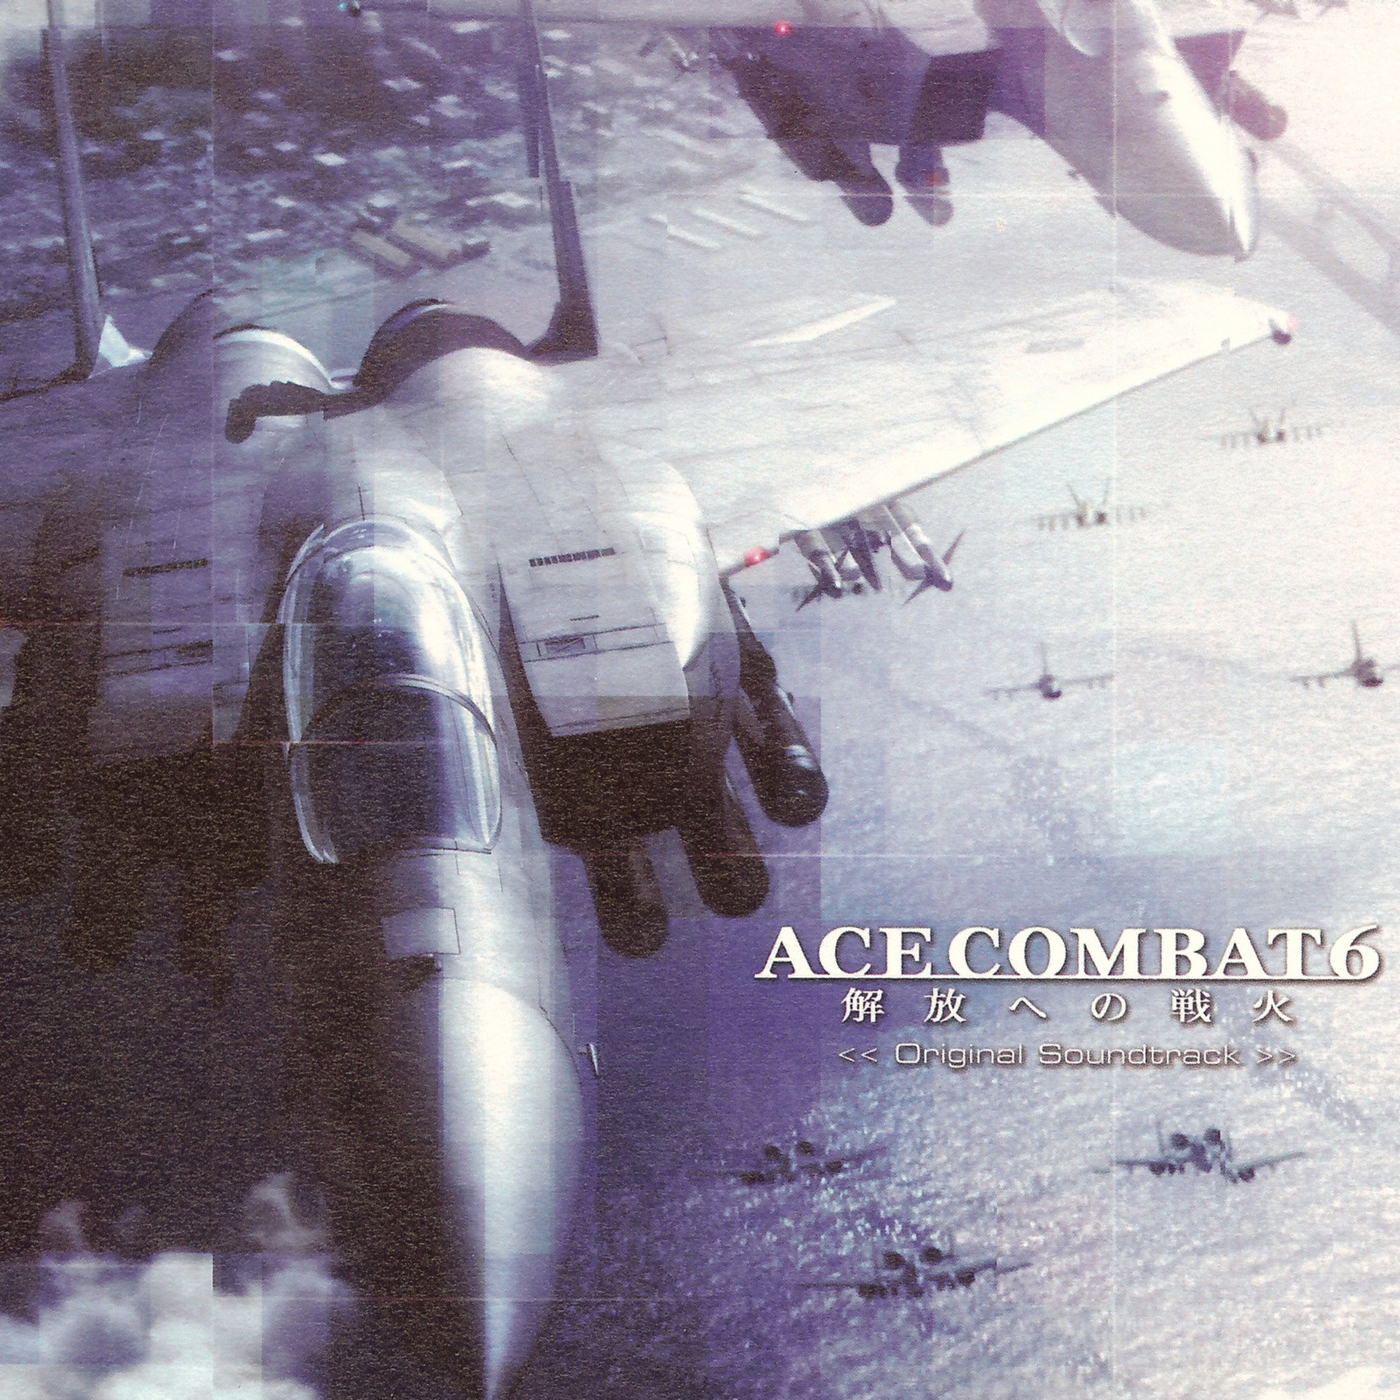 ace combat 6 free download